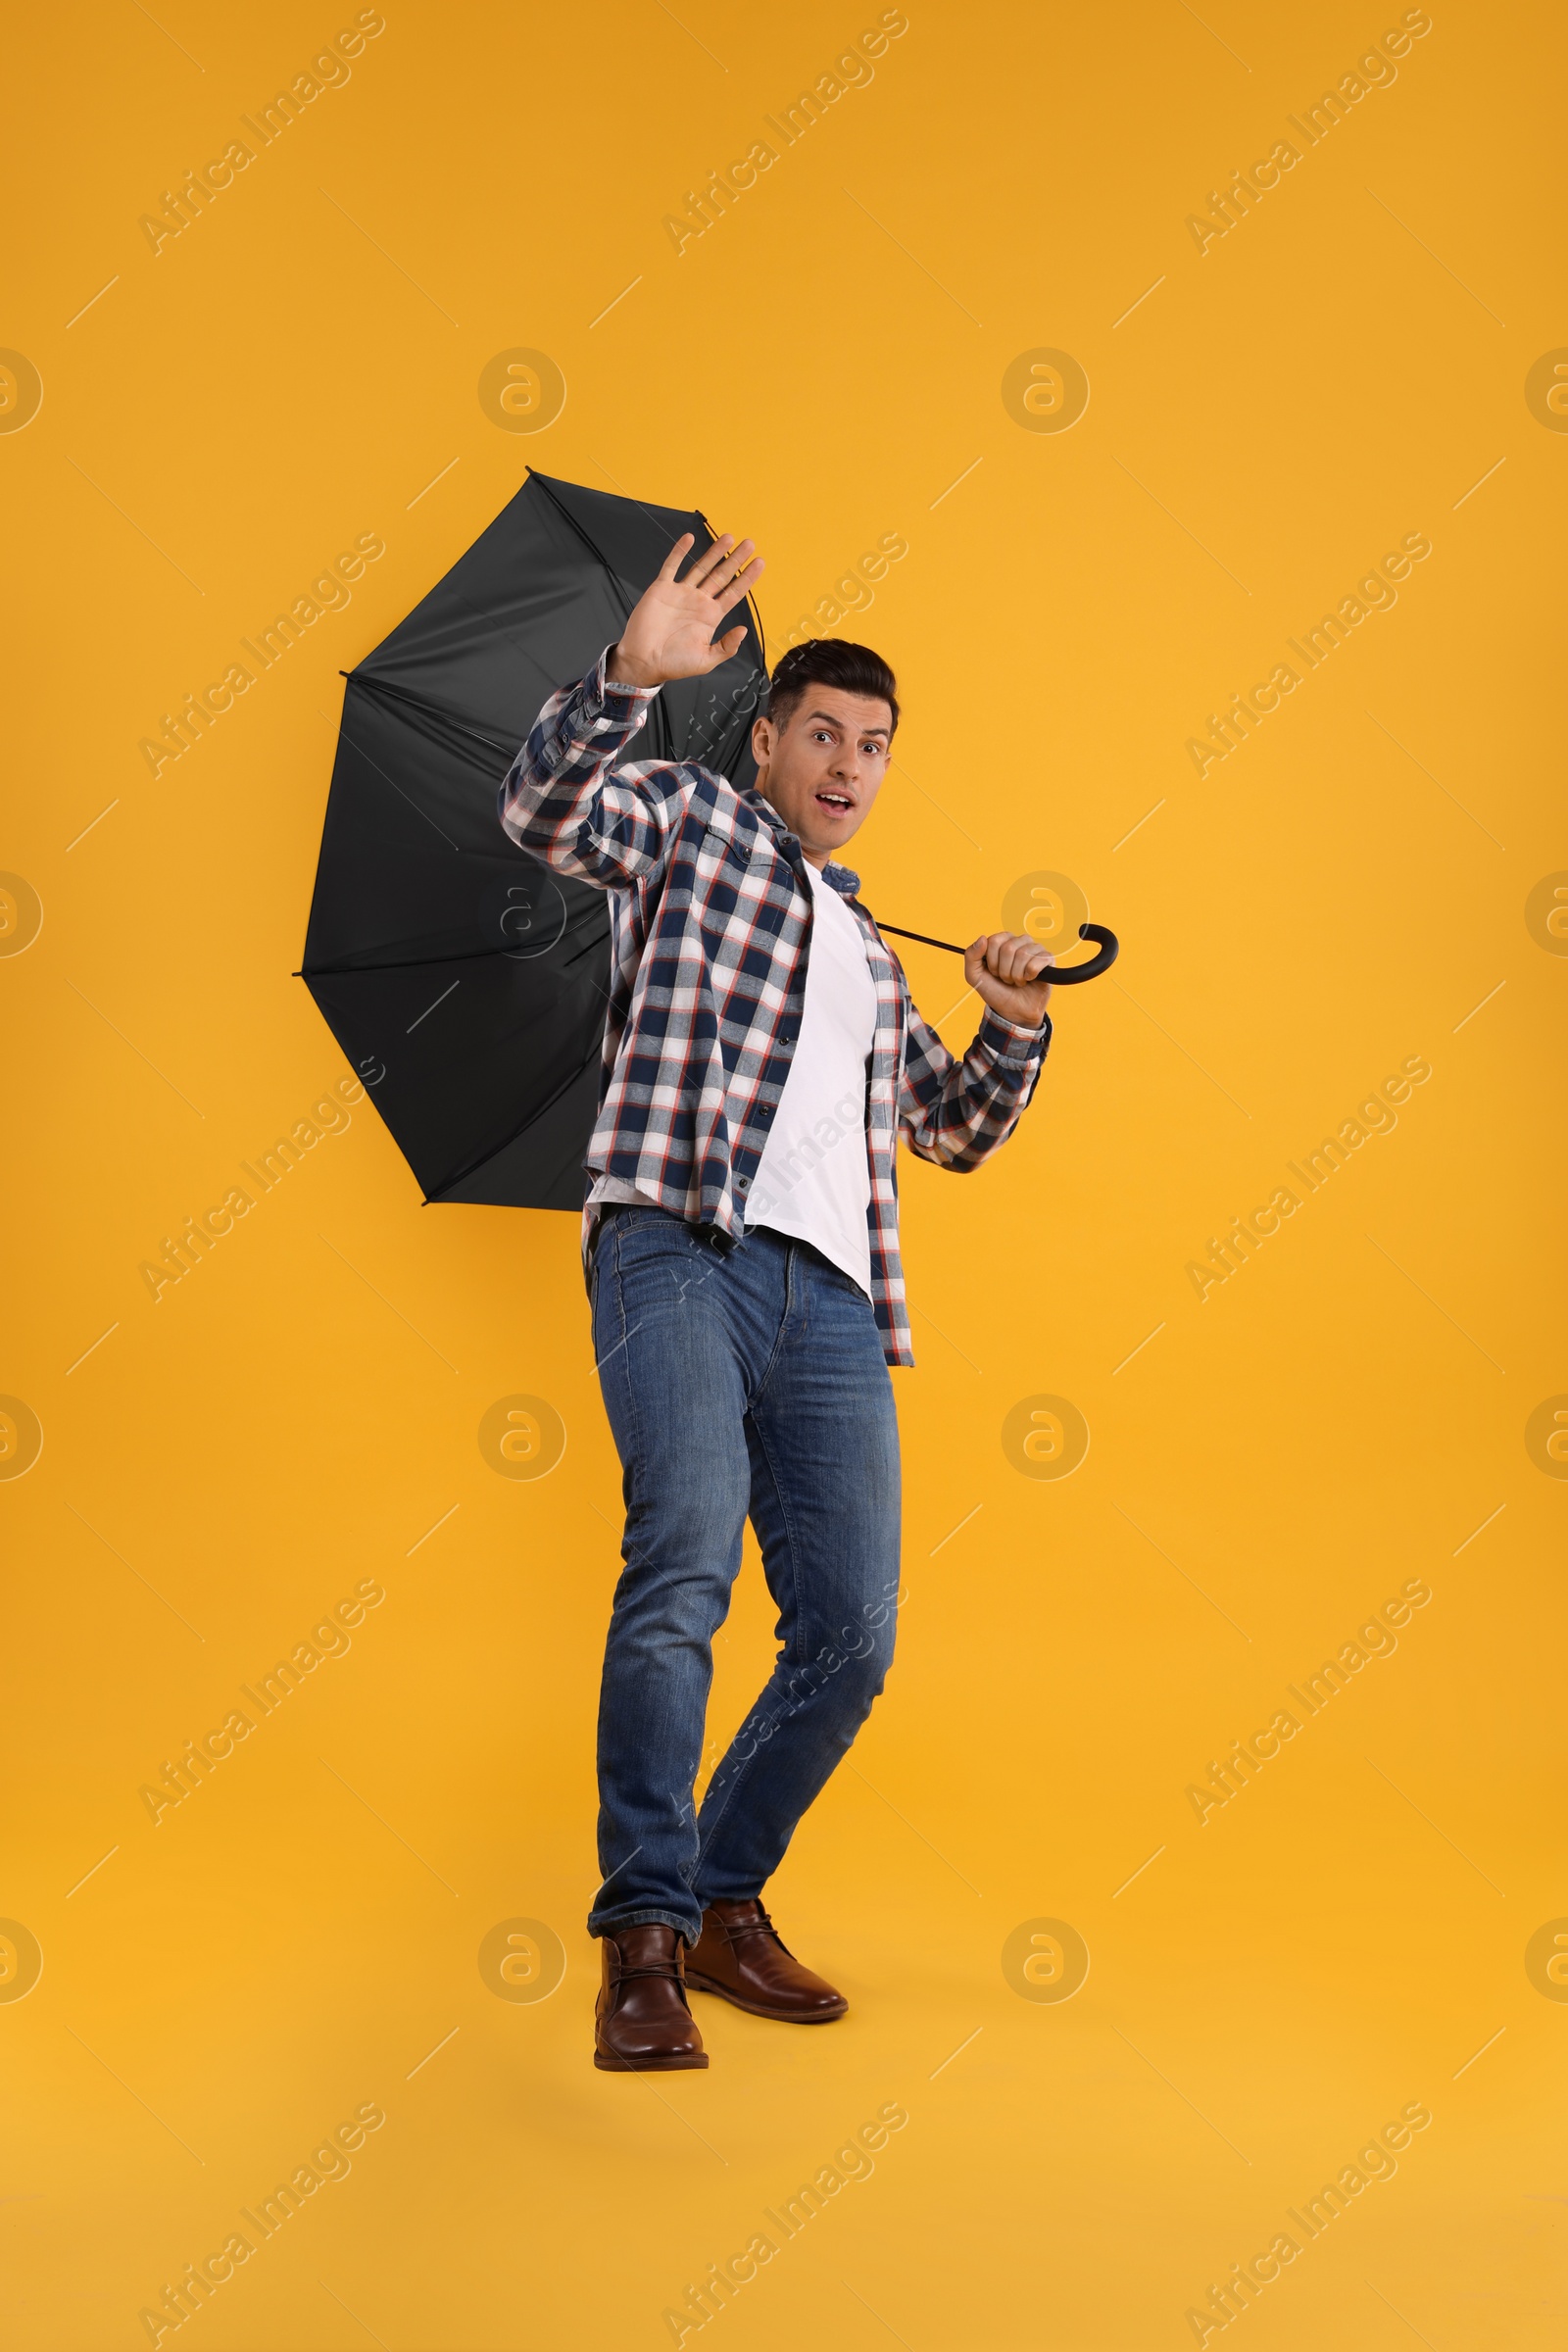 Photo of Emotional man with umbrella caught in gust of wind on yellow background